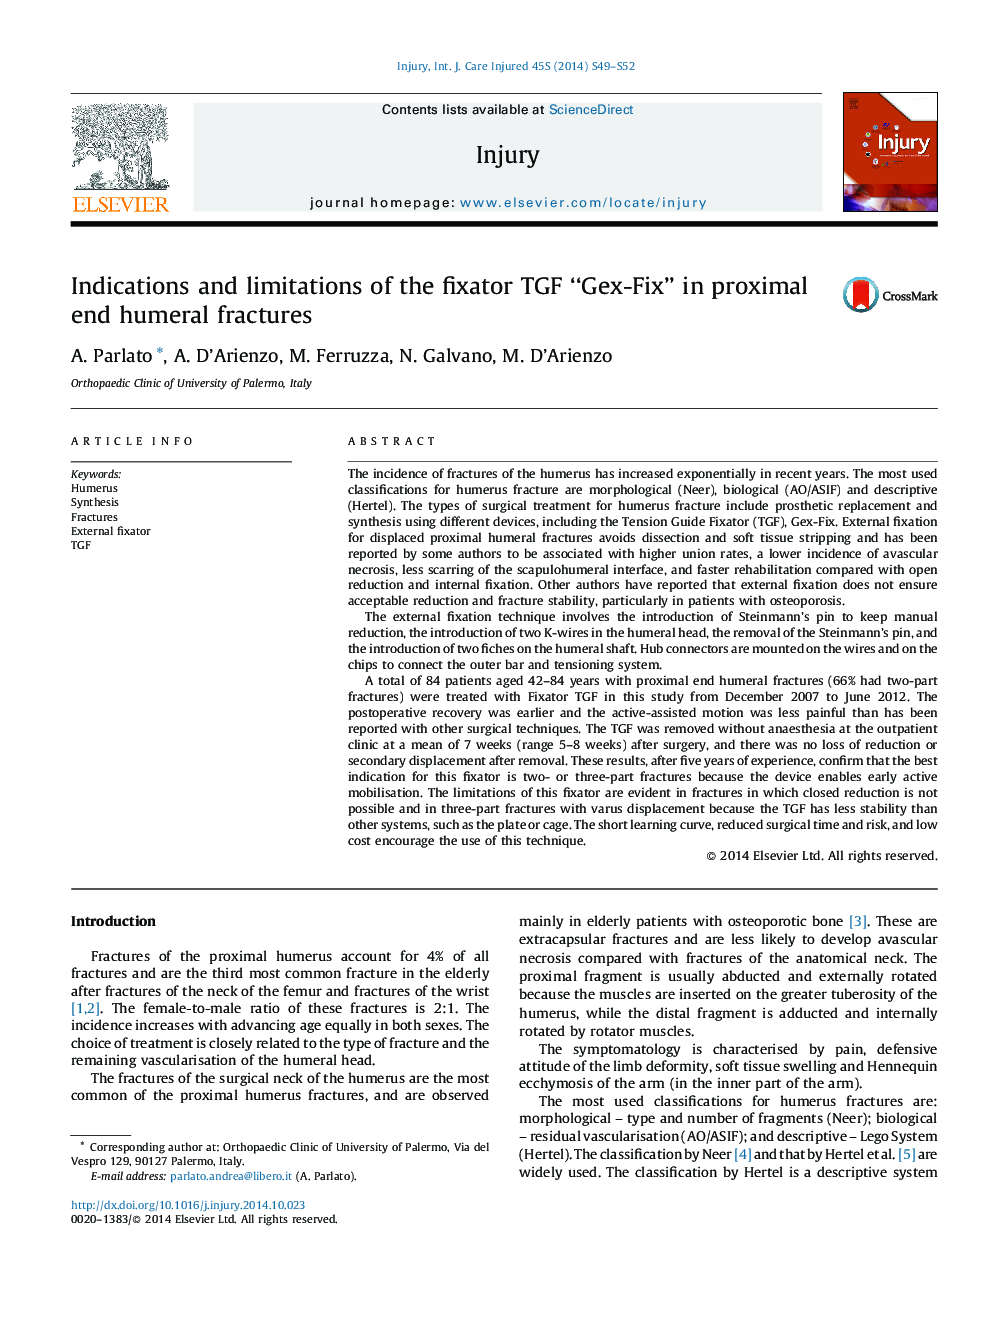 Indications and limitations of the fixator TGF “Gex-Fix” in proximal end humeral fractures